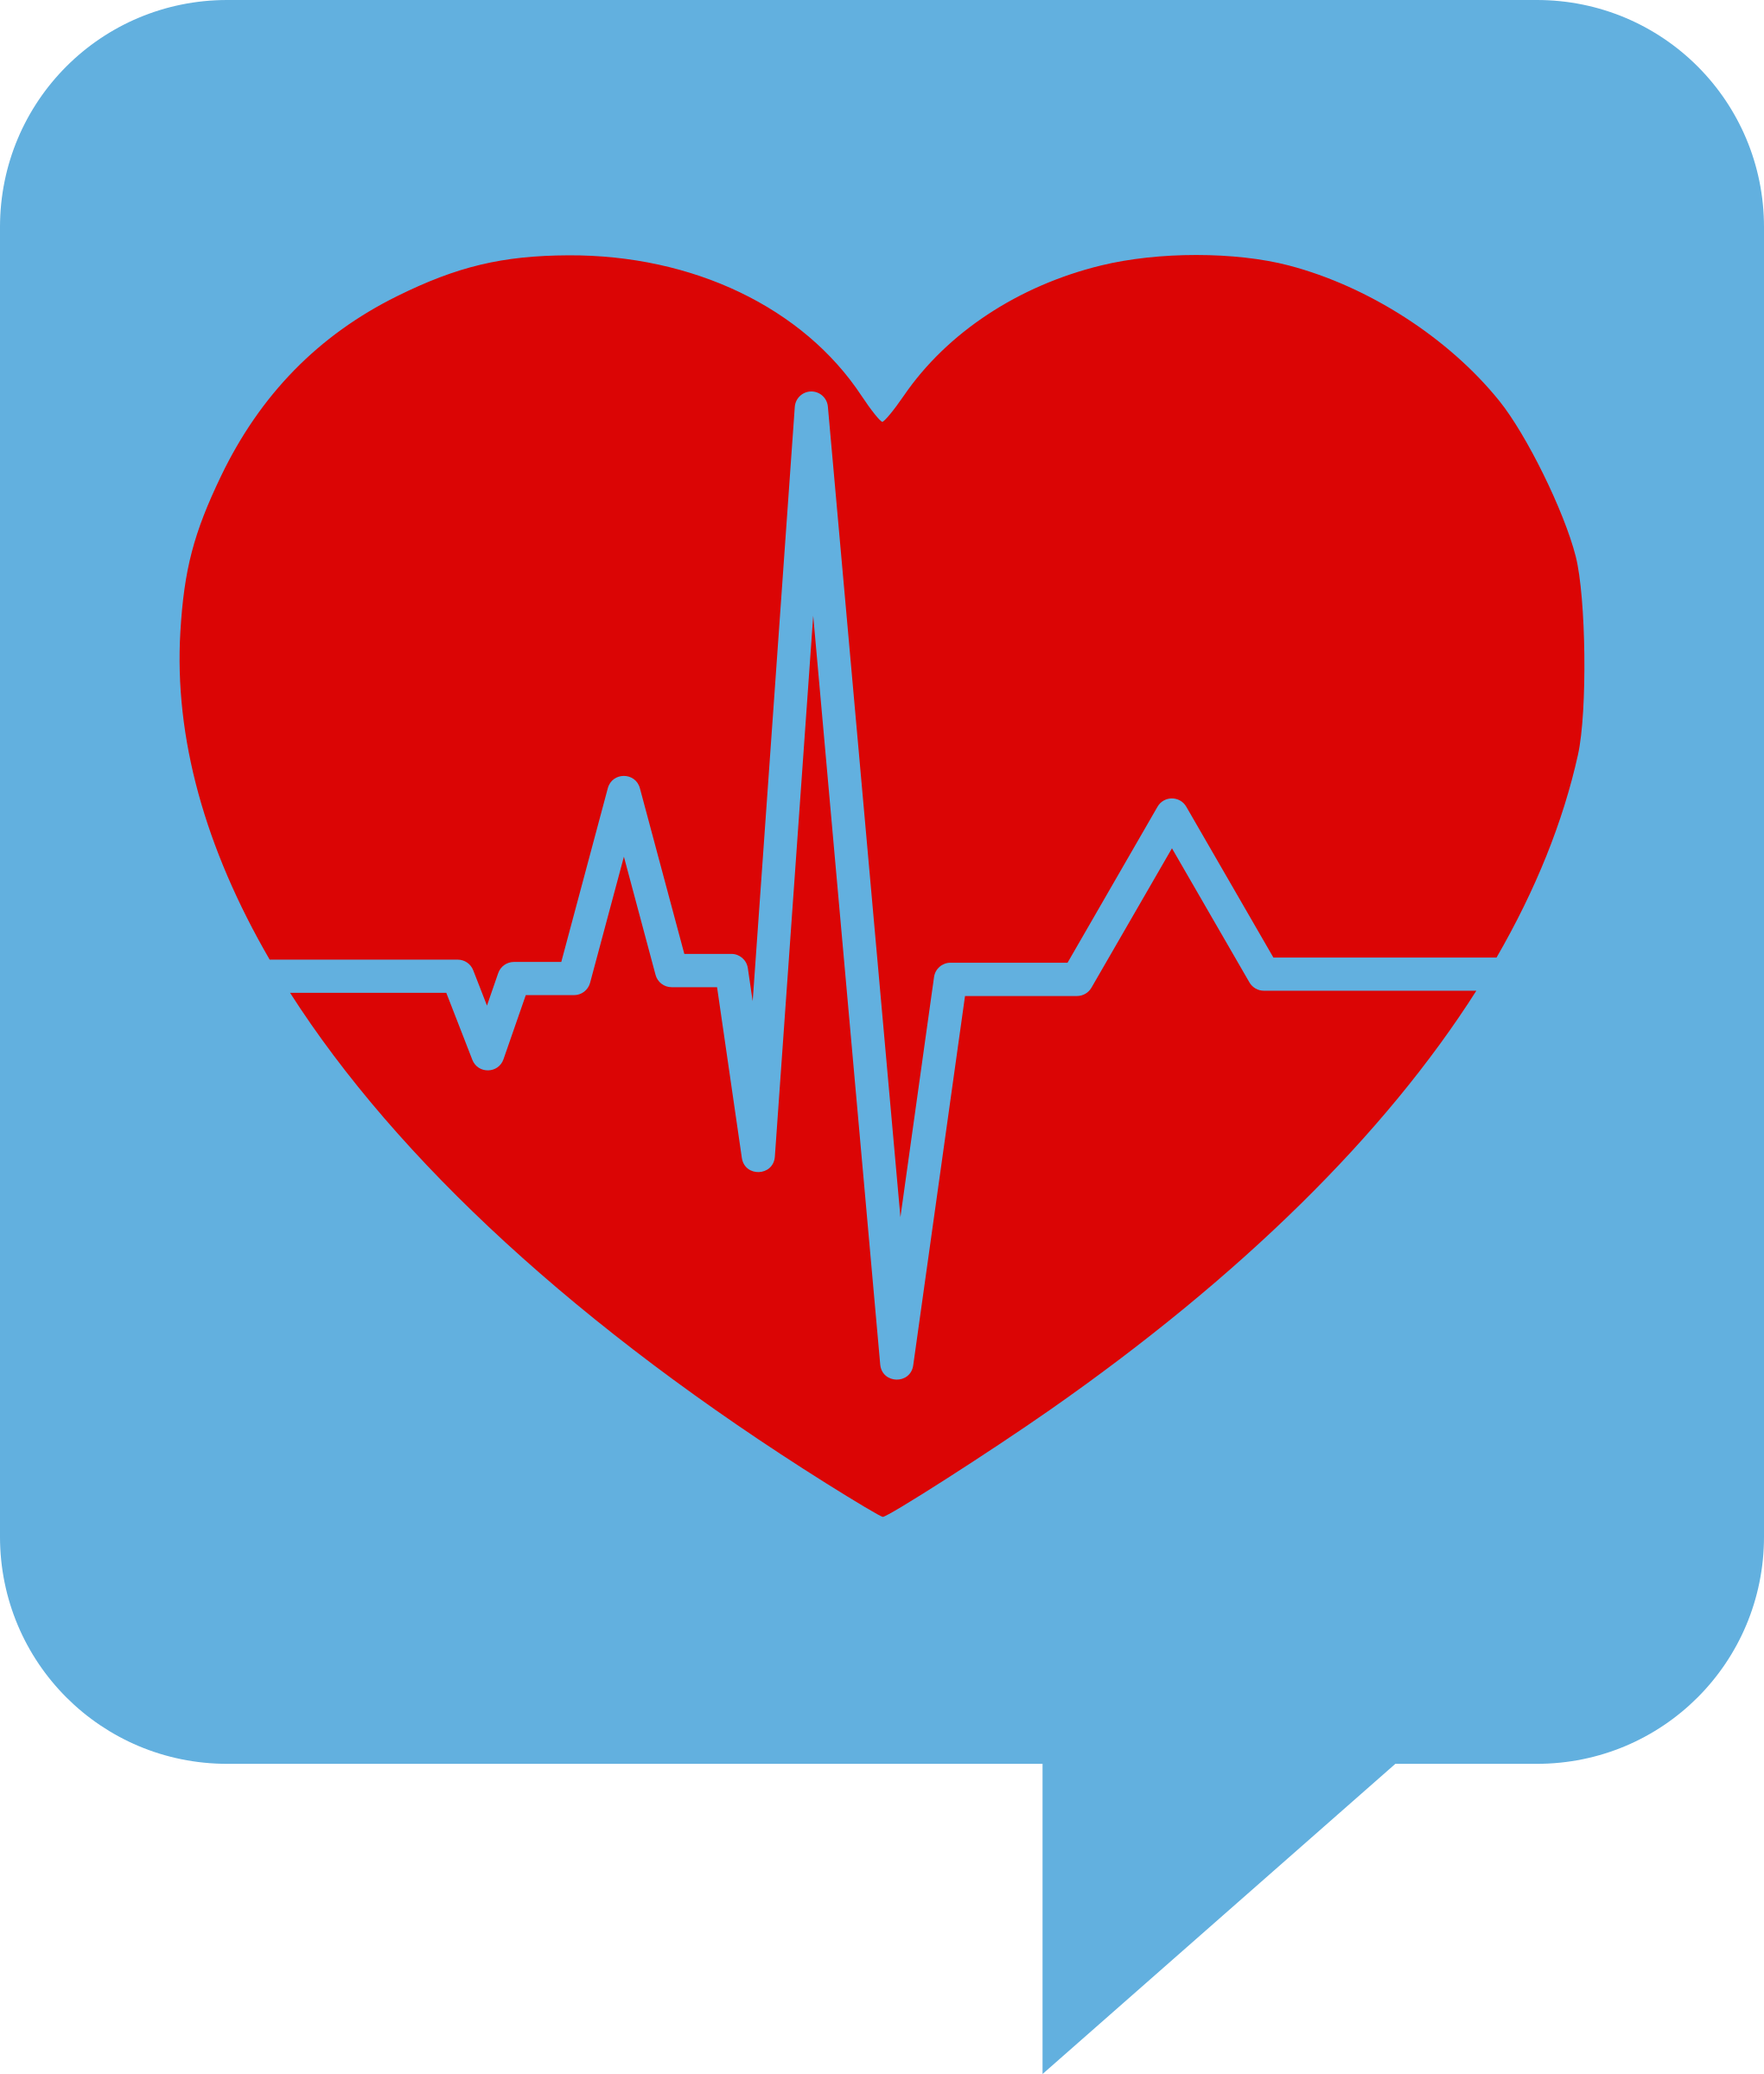 Heartbeat shopping clipart images